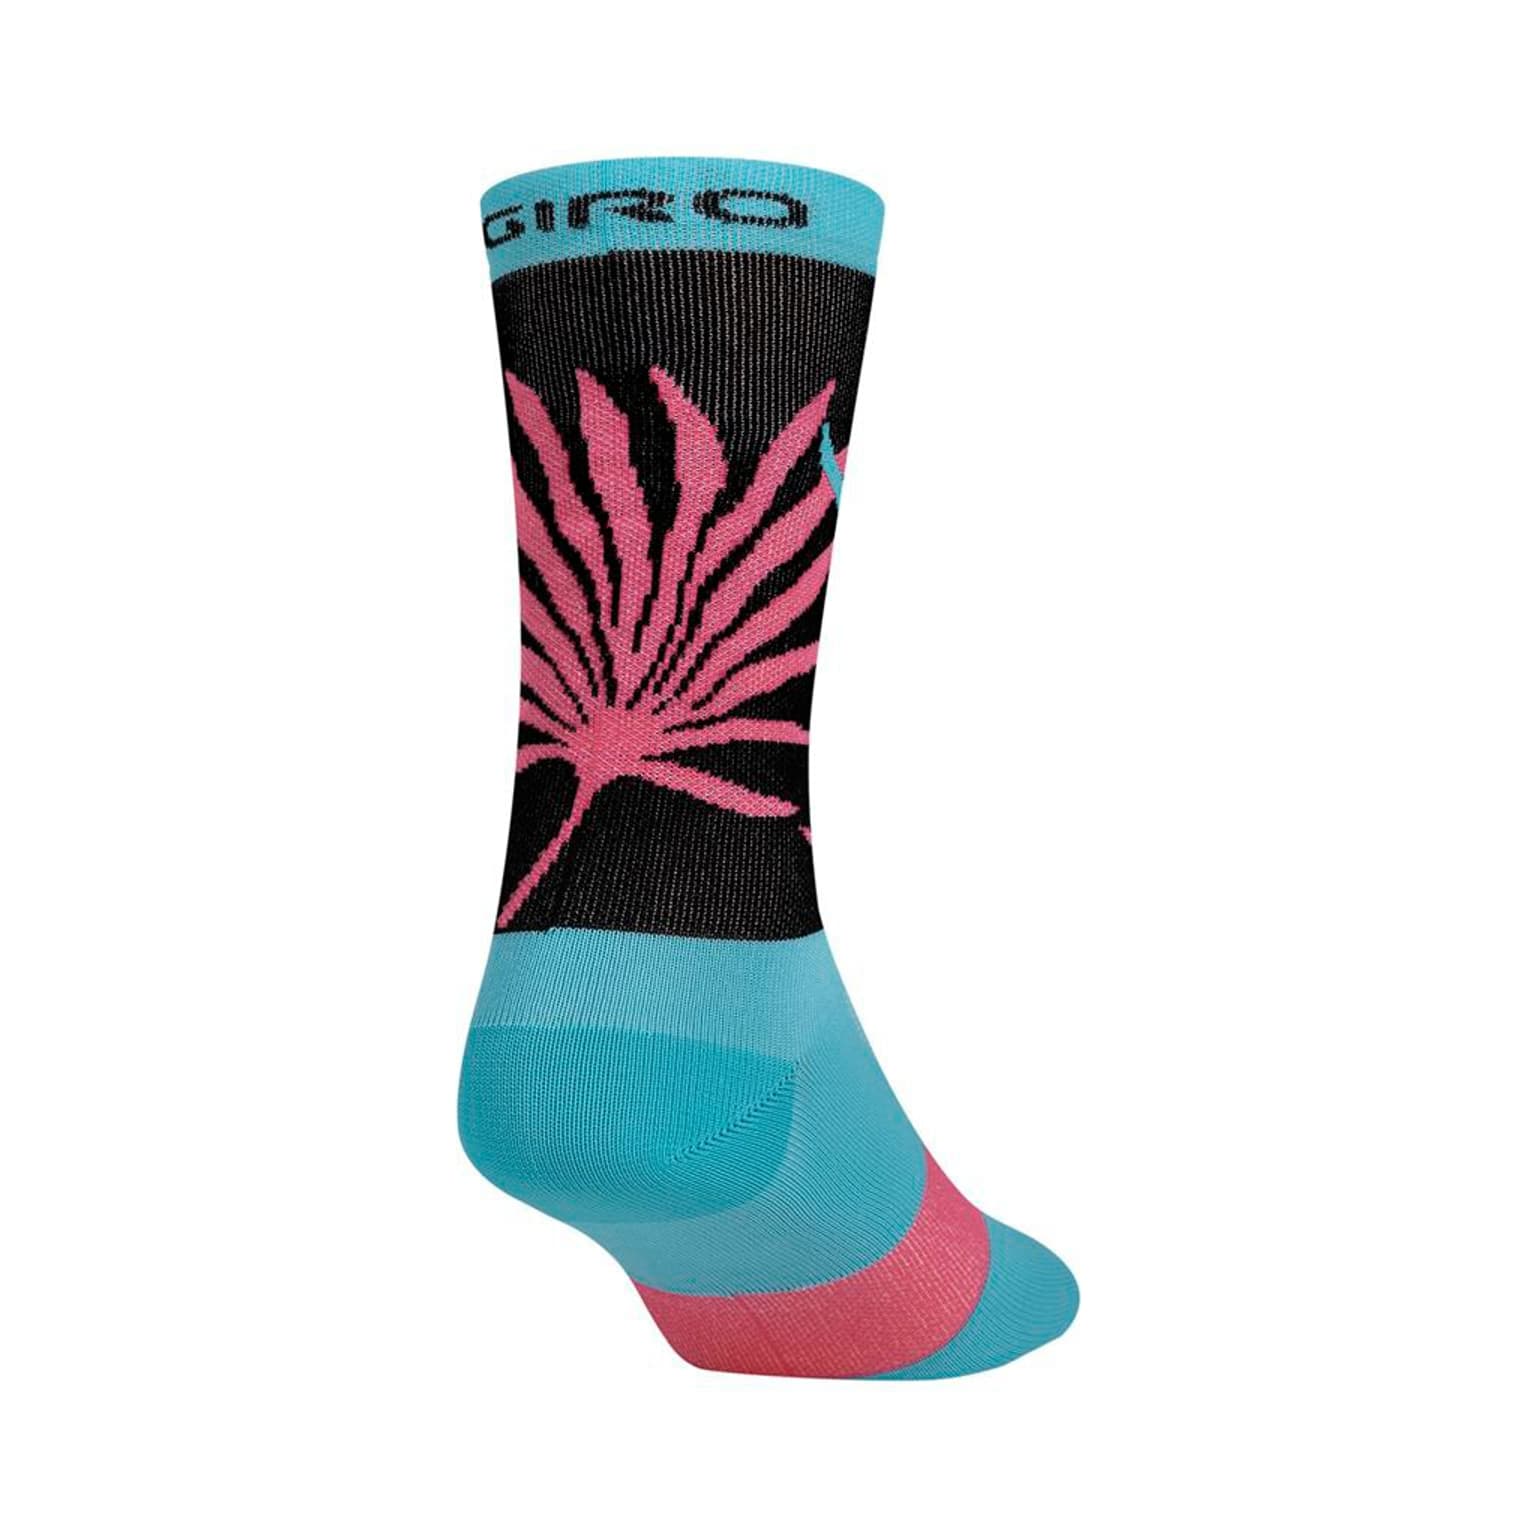 Giro Giro Comp Racer High Rise Sock Chaussettes turquoise-claire 2